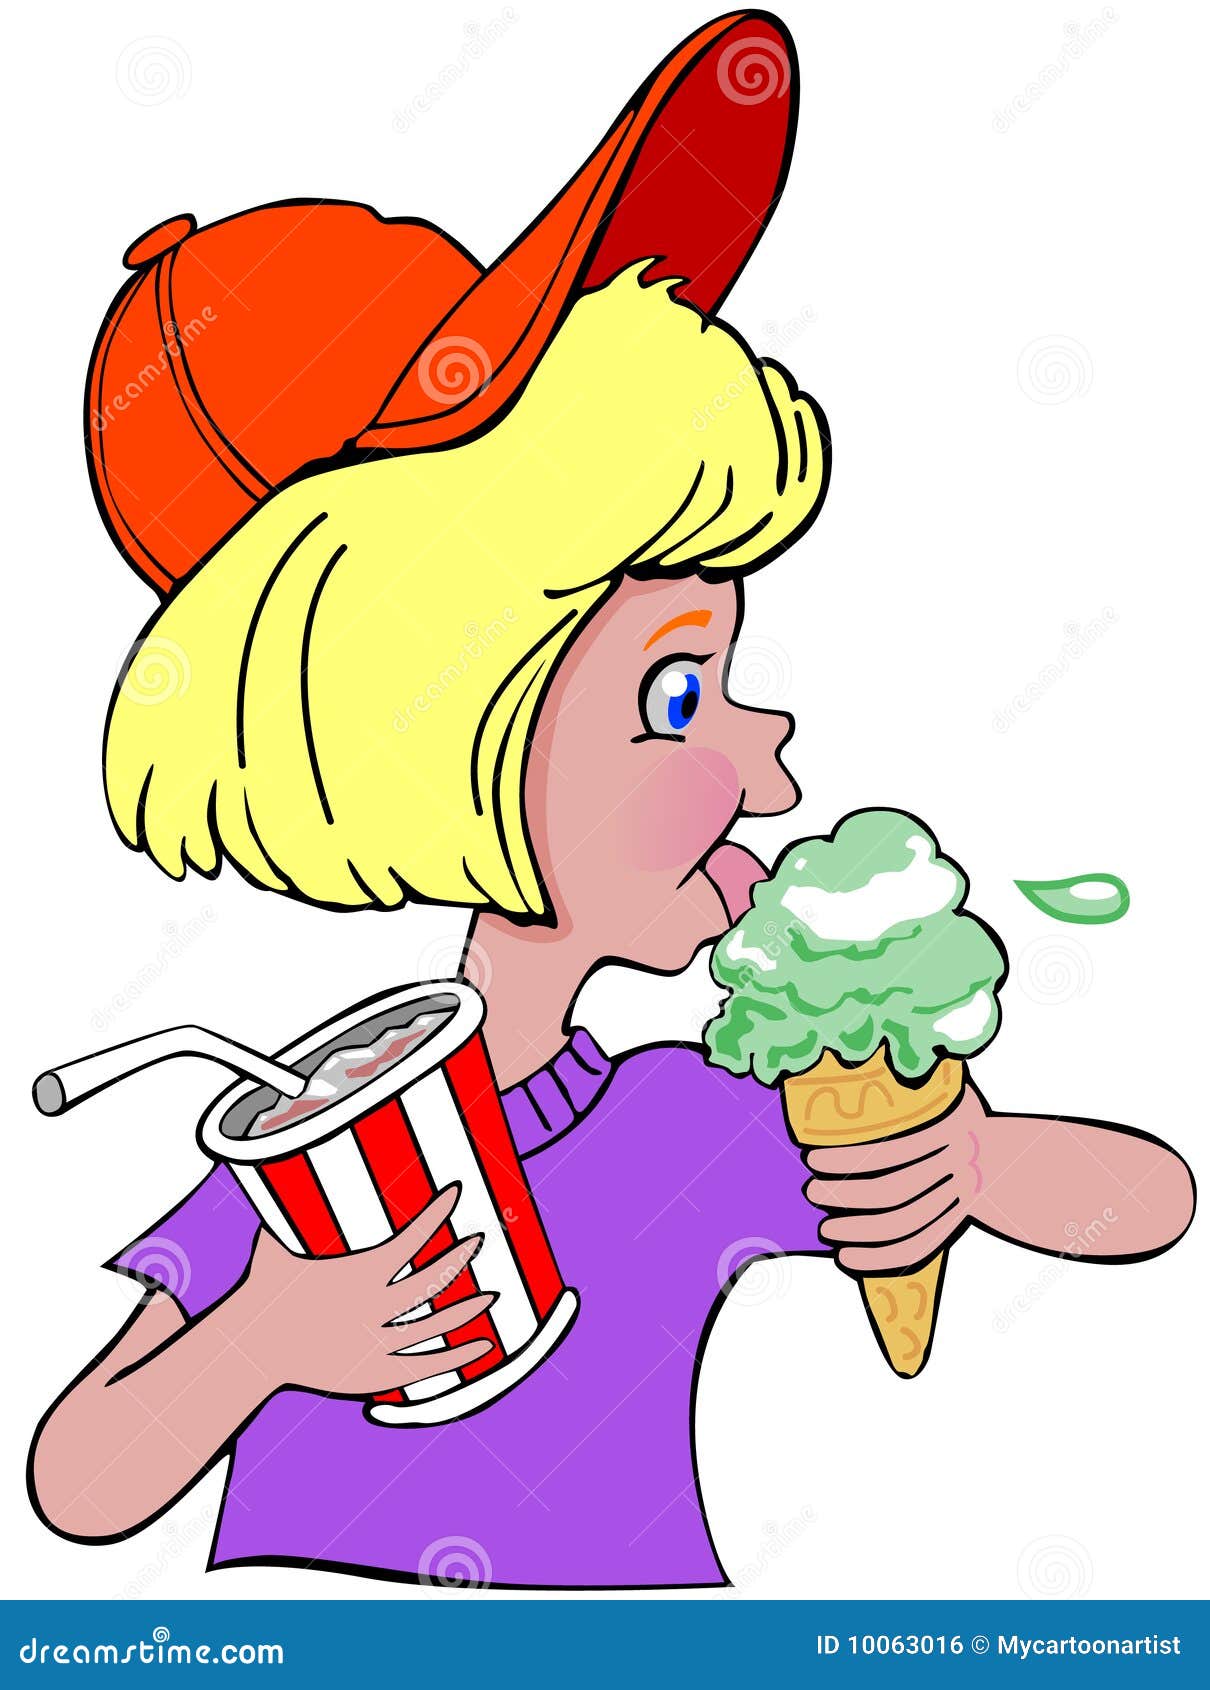 clipart of a girl eating - photo #35